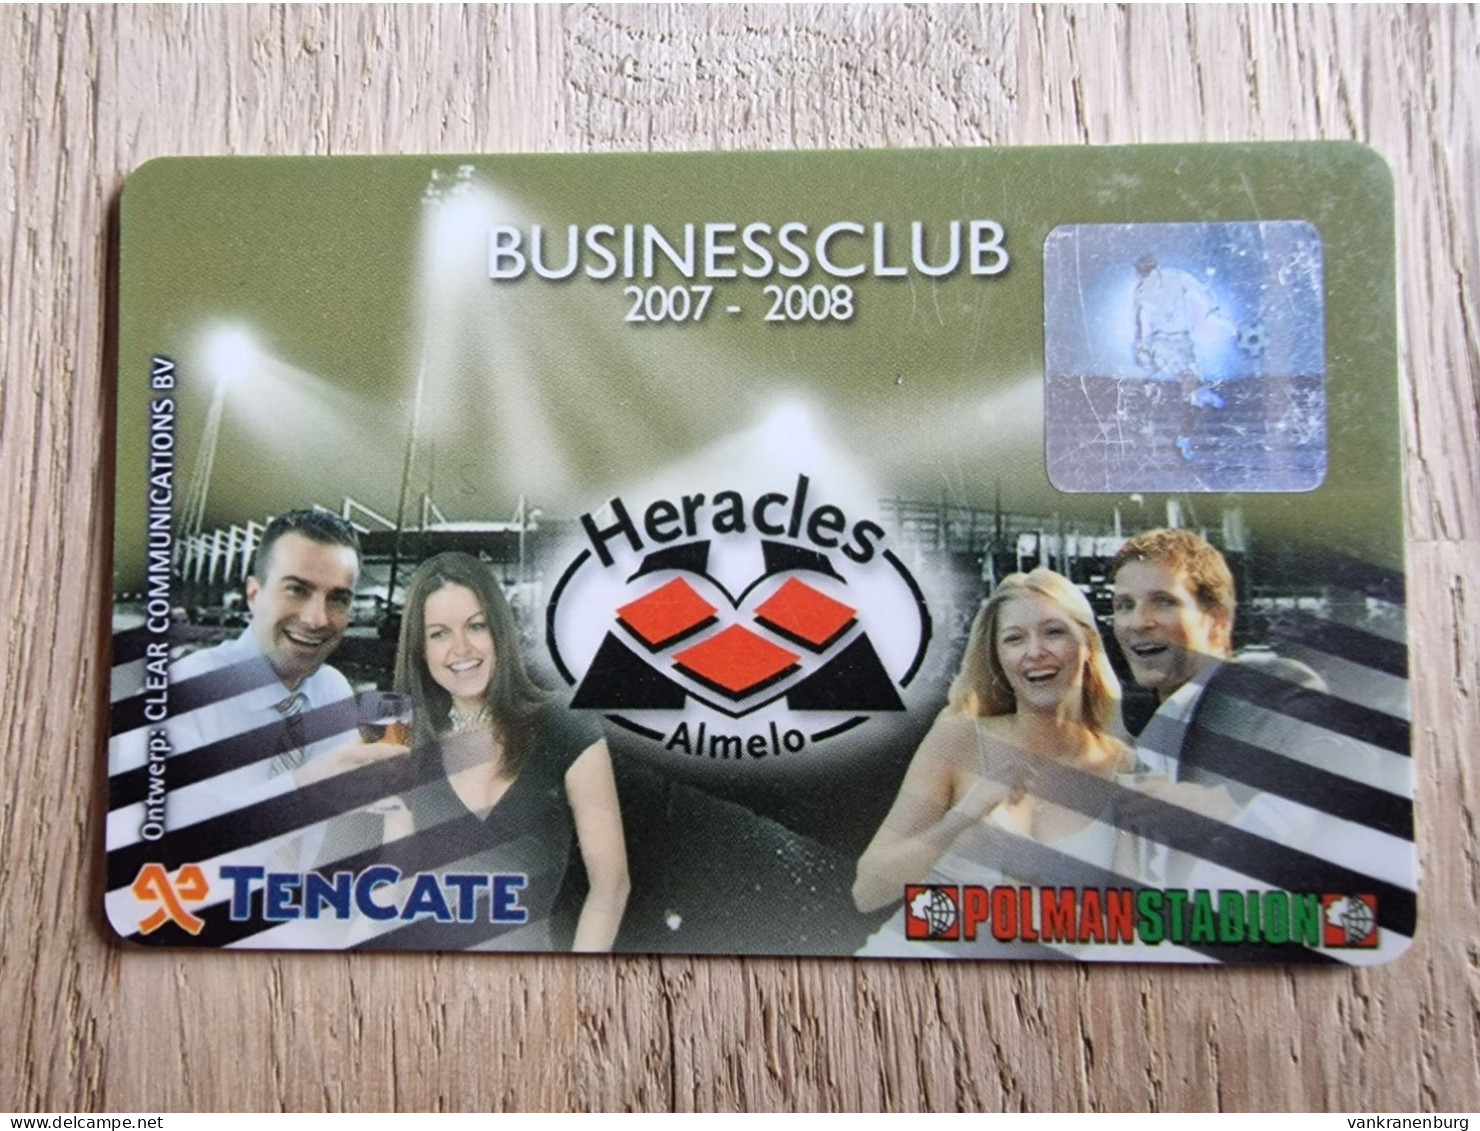 Business Club Card - SC Heracles Almelo - 2007-2008 - Football Soccer Fussball Voetbal Foot - Habillement, Souvenirs & Autres